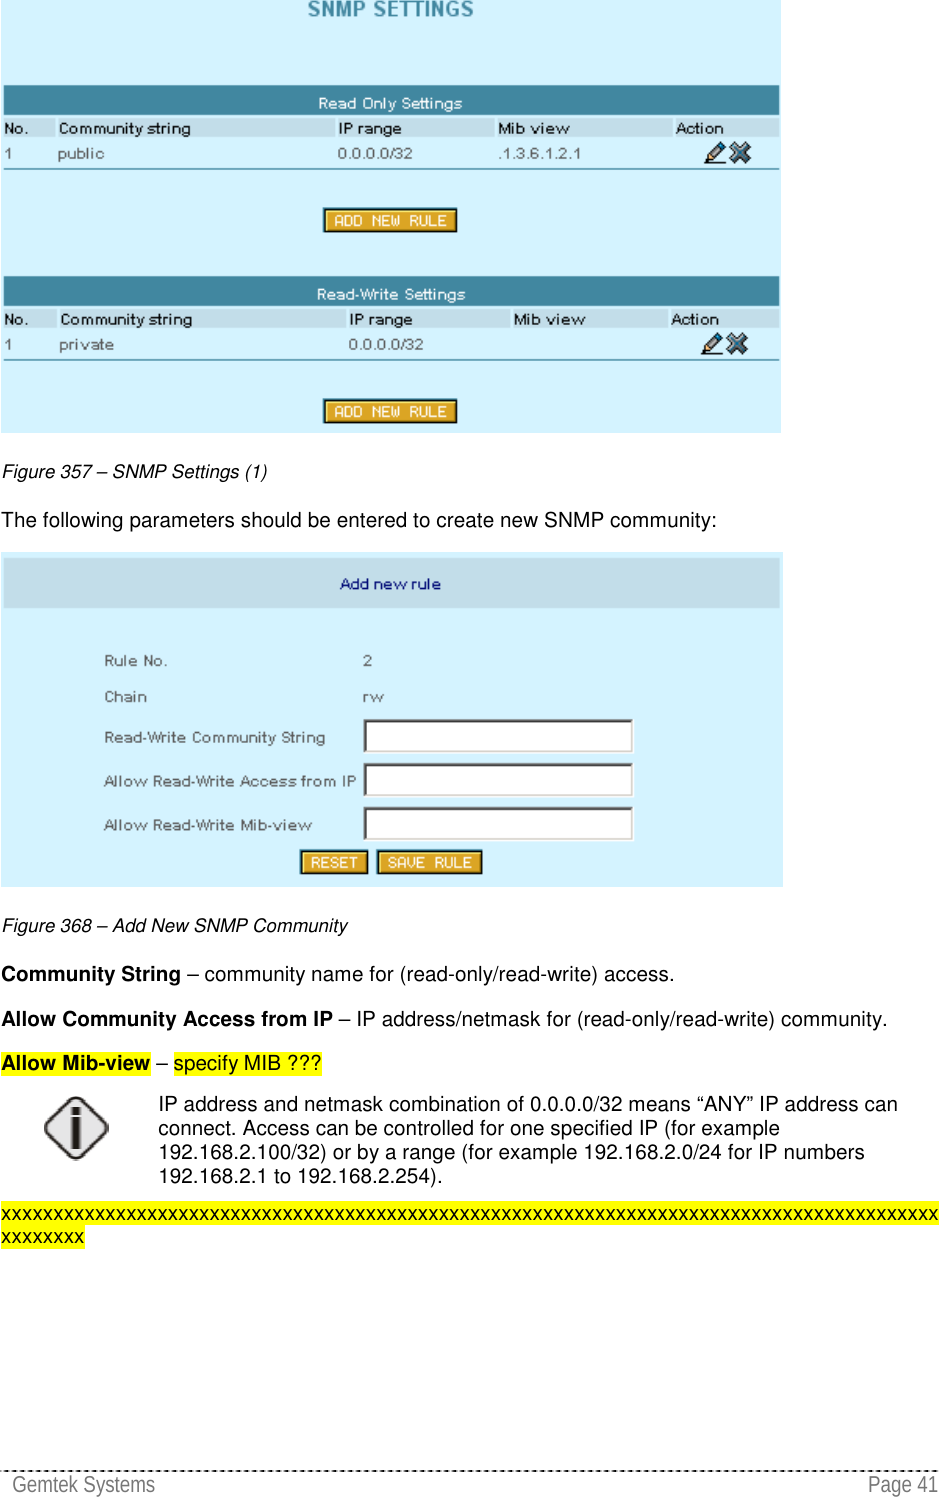 Gemtek Systems Page 41Figure 357 – SNMP Settings (1)The following parameters should be entered to create new SNMP community:Figure 368 – Add New SNMP CommunityCommunity String – community name for (read-only/read-write) access.Allow Community Access from IP – IP address/netmask for (read-only/read-write) community.Allow Mib-view – specify MIB ???IP address and netmask combination of 0.0.0.0/32 means “ANY” IP address canconnect. Access can be controlled for one specified IP (for example192.168.2.100/32) or by a range (for example 192.168.2.0/24 for IP numbers192.168.2.1 to 192.168.2.254).xxxxxxxxxxxxxxxxxxxxxxxxxxxxxxxxxxxxxxxxxxxxxxxxxxxxxxxxxxxxxxxxxxxxxxxxxxxxxxxxxxxxxxxxxxxxxxxxxx